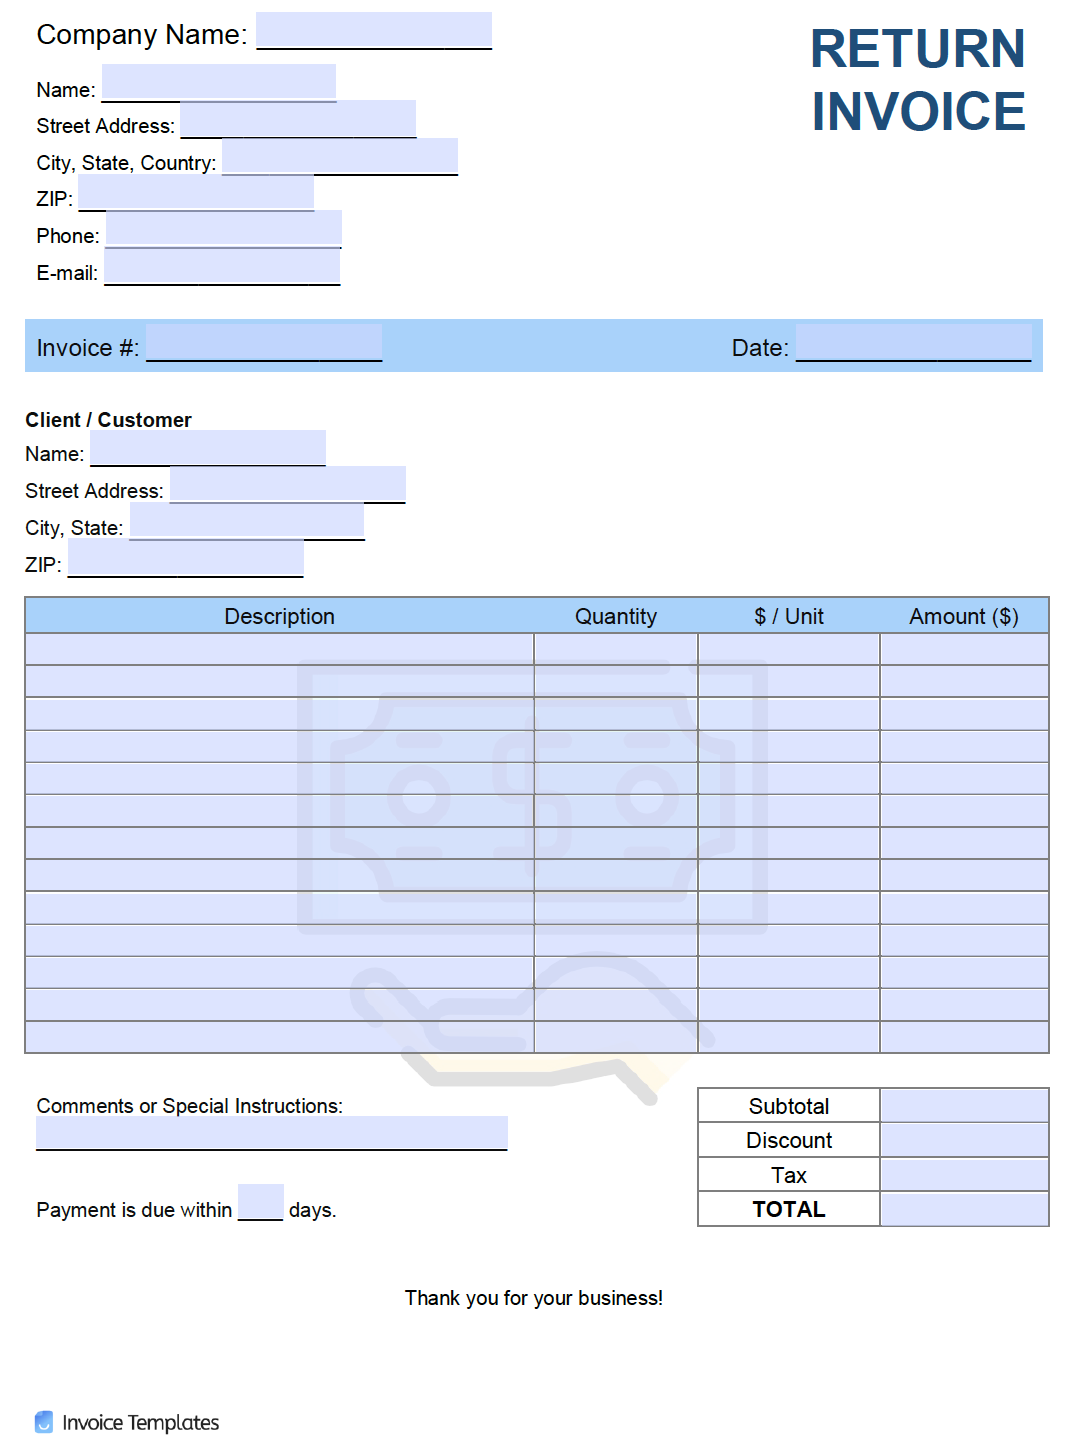 Refund Invoice Template from invoicetemplates.com